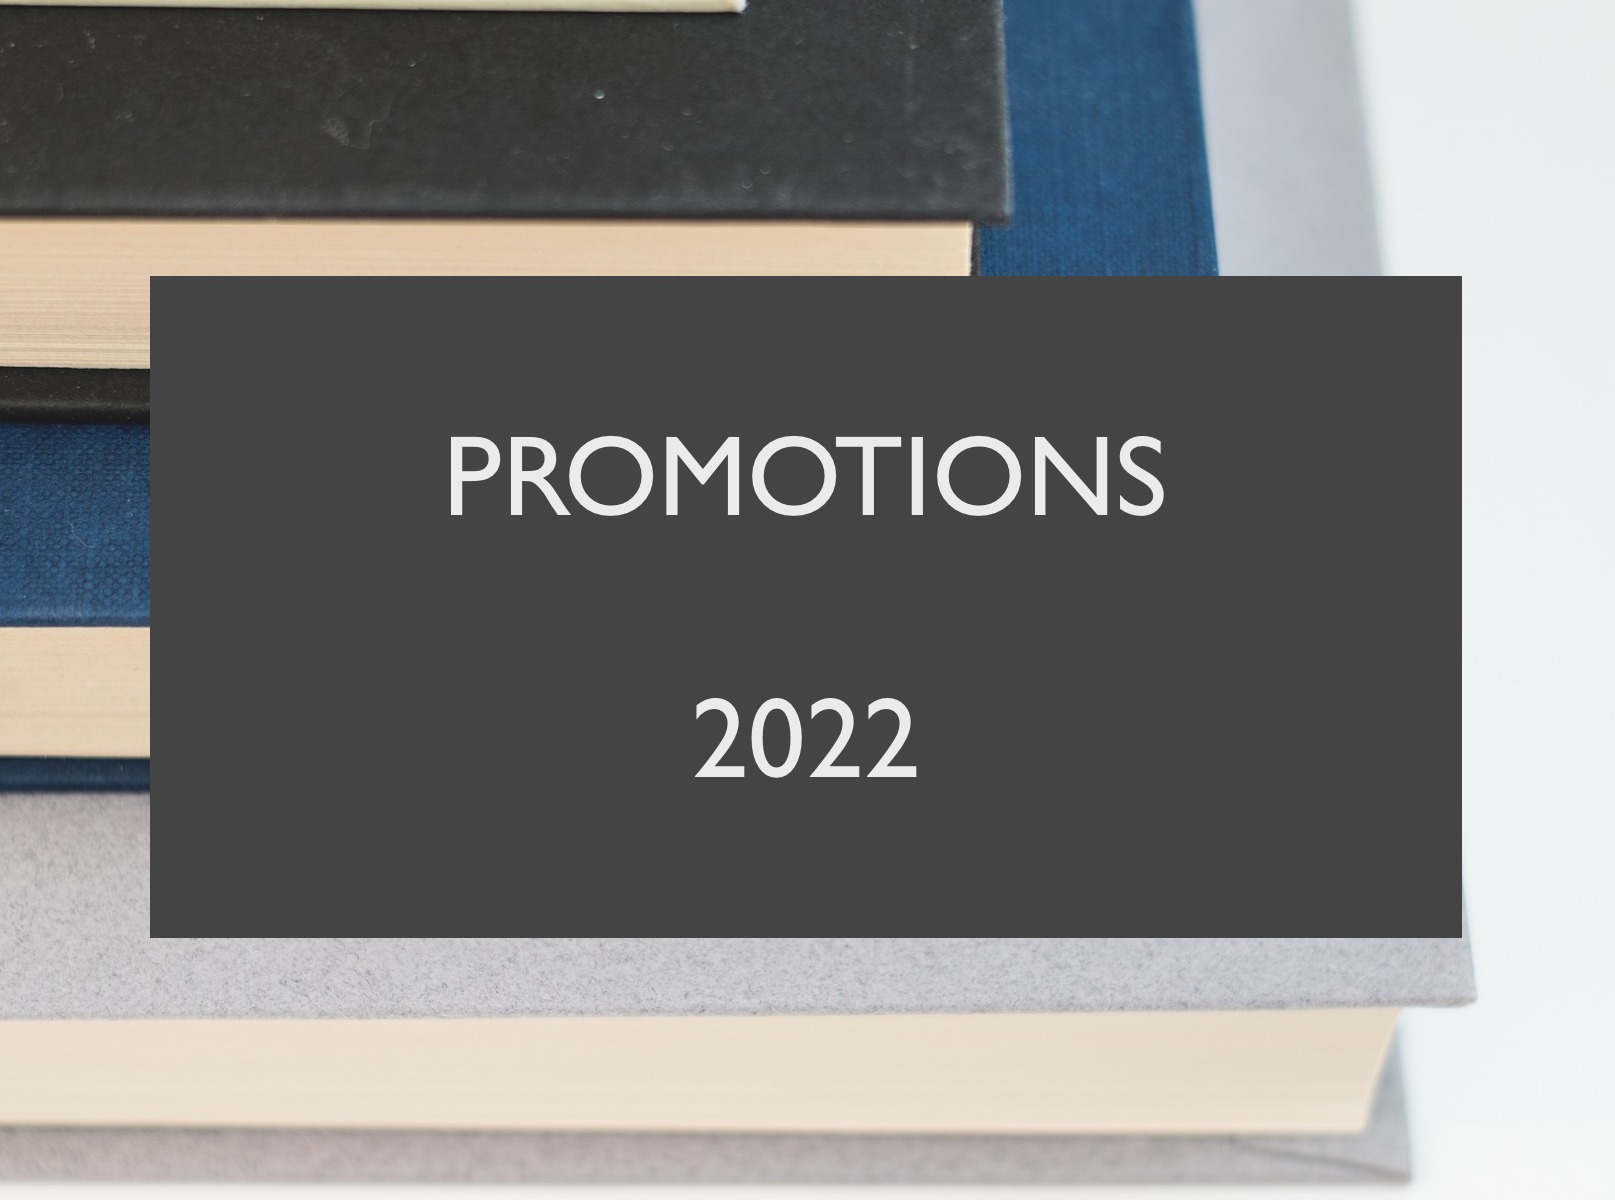 Promotions 2022